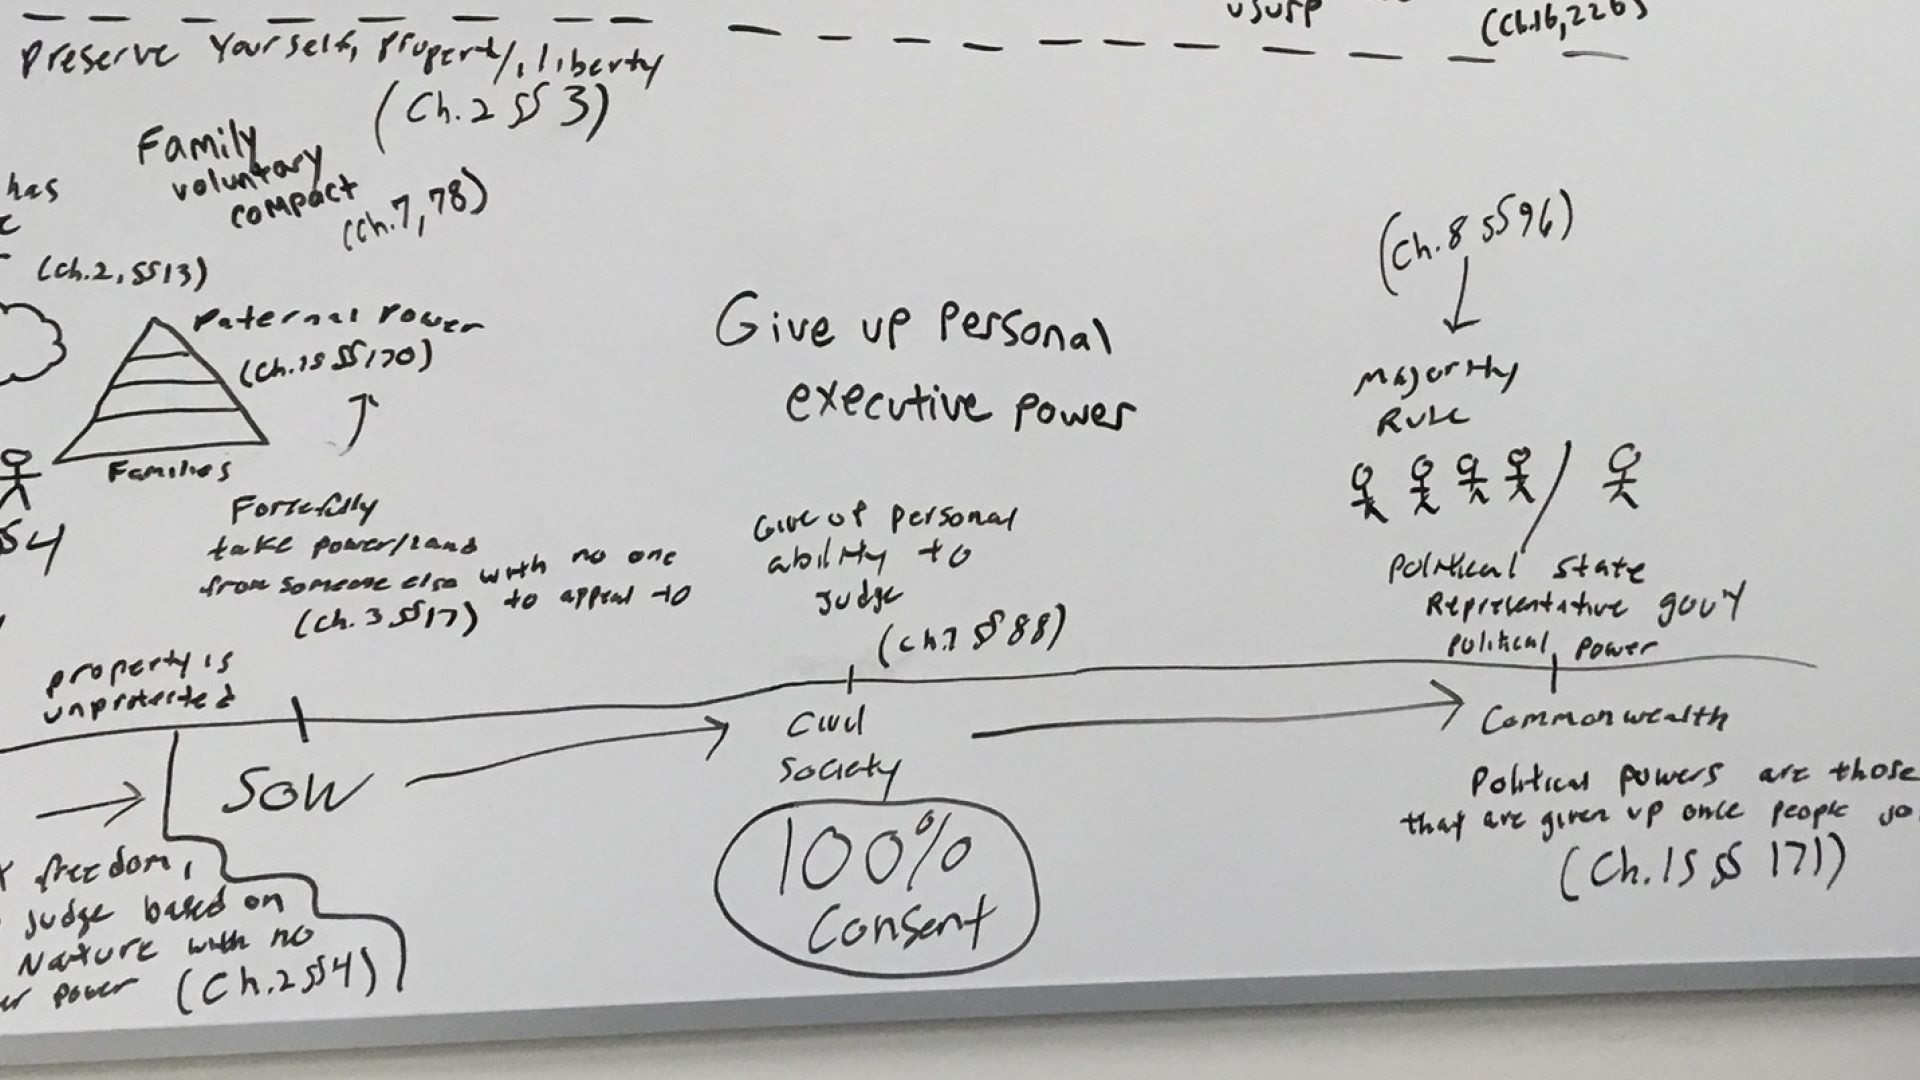 Student visualization of political theory reading, written on whiteboard